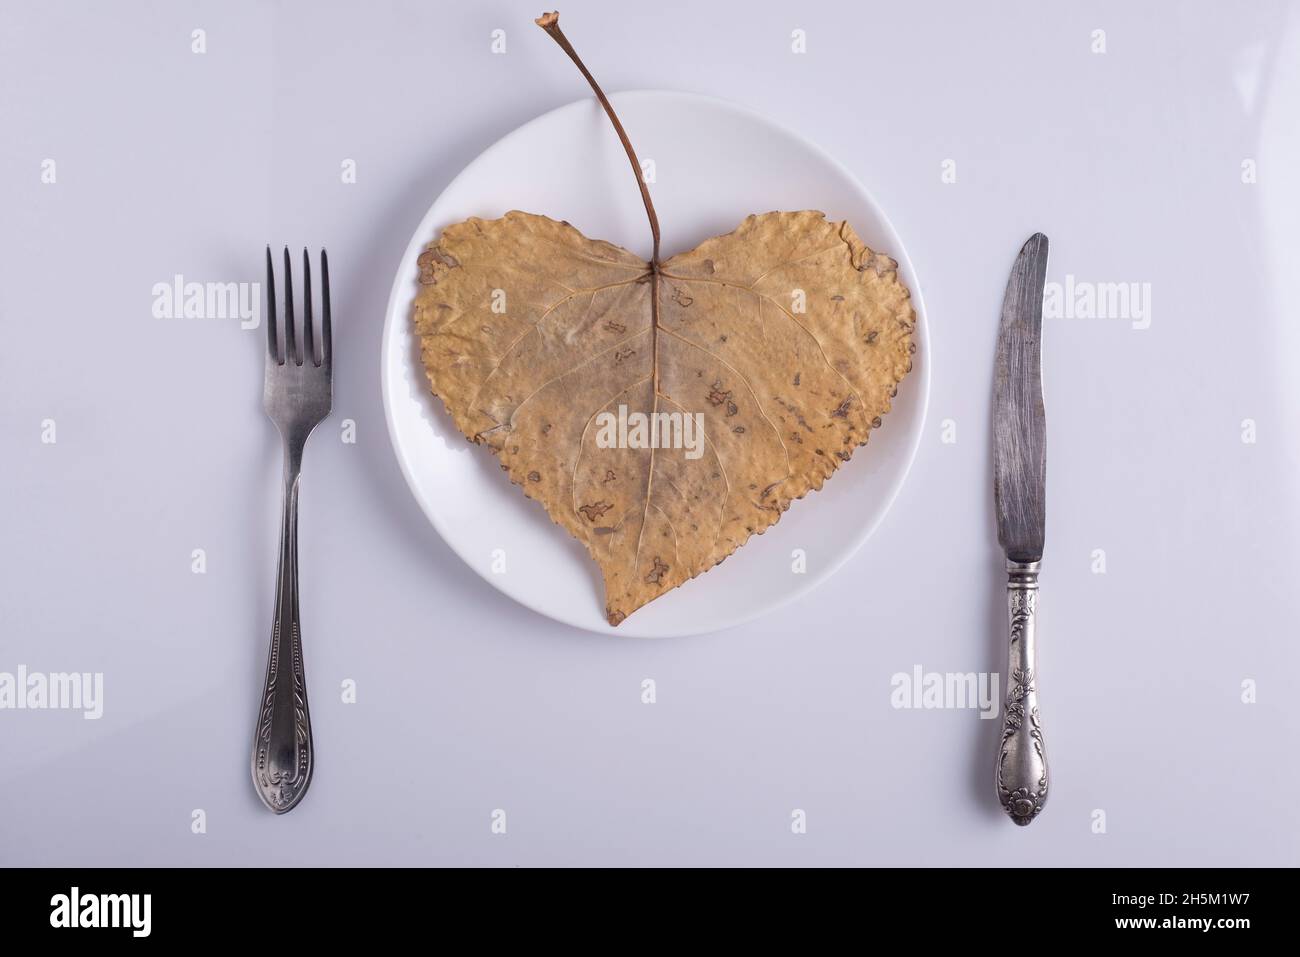 creative autumn concept heart shaped leaf on plate with cutlery cutlery on white background Stock Photo